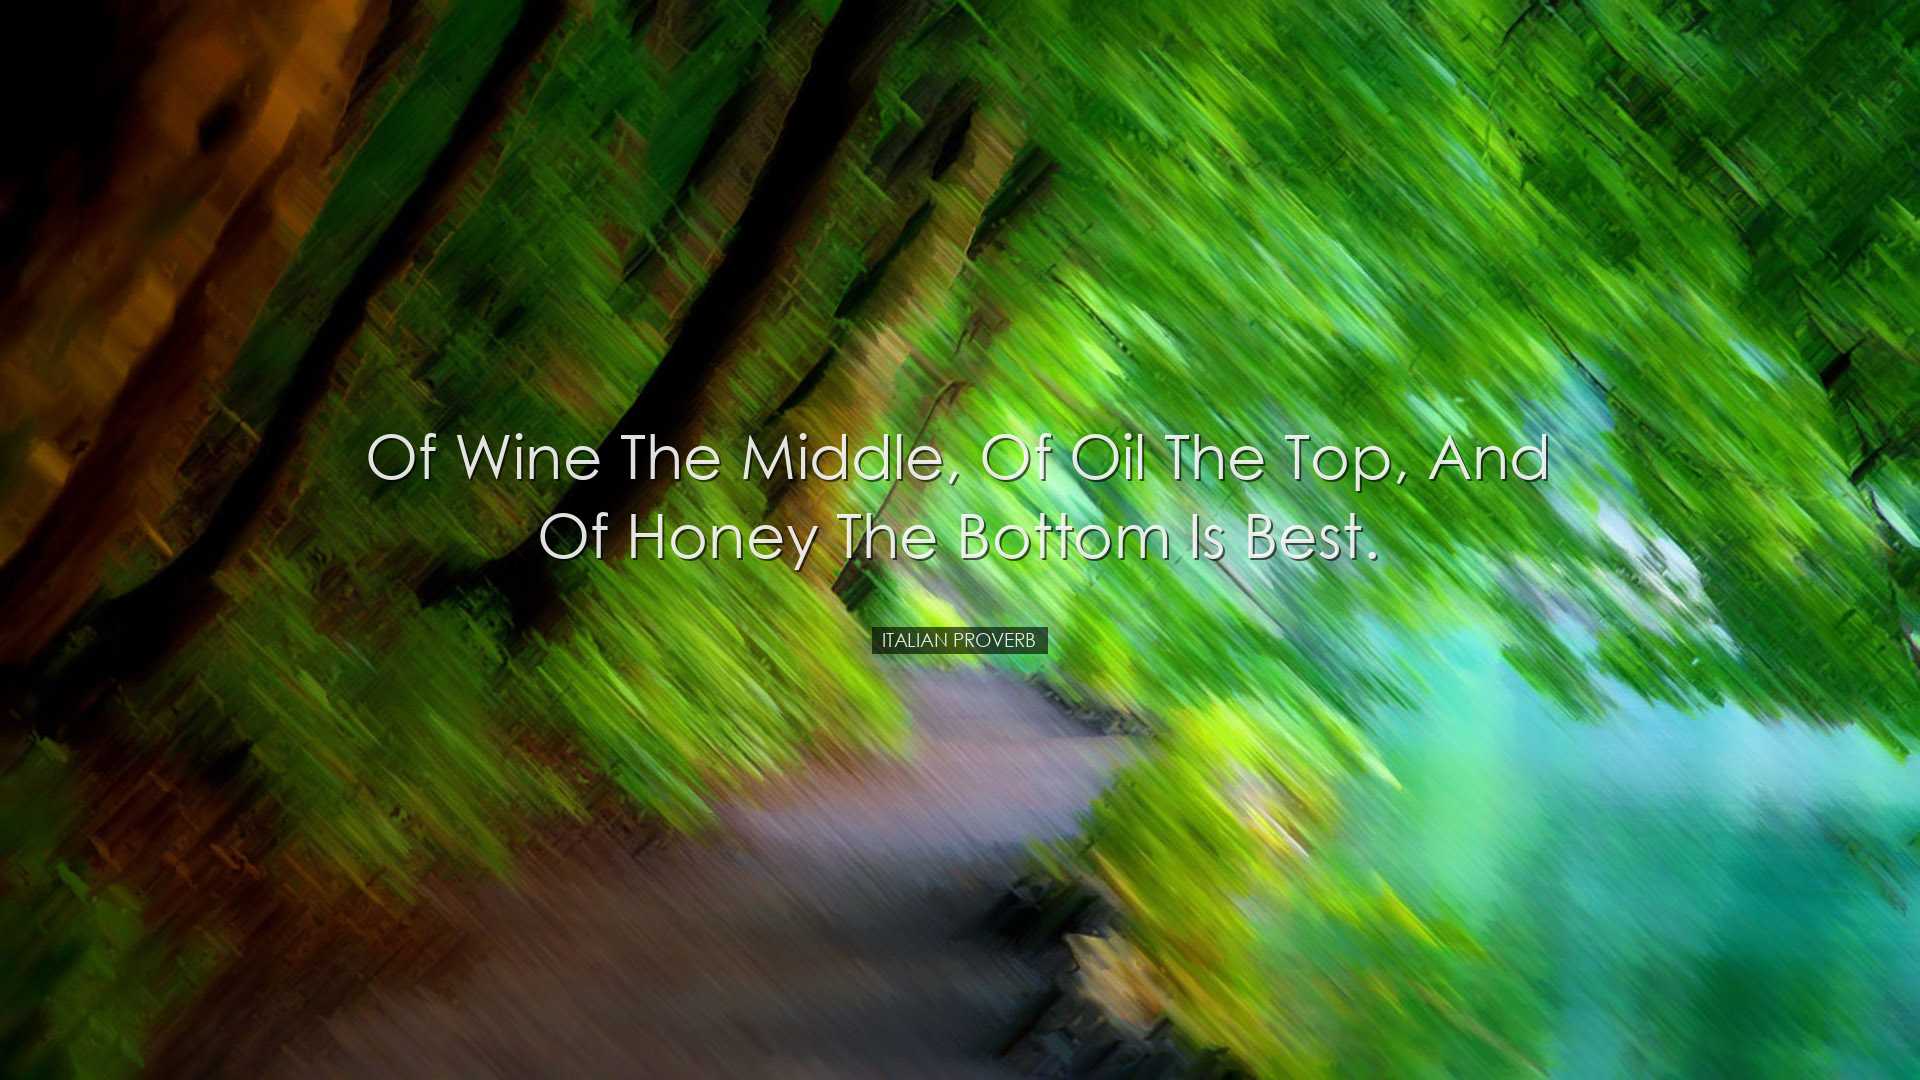 Of wine the middle, of oil the top, and of honey the bottom is bes